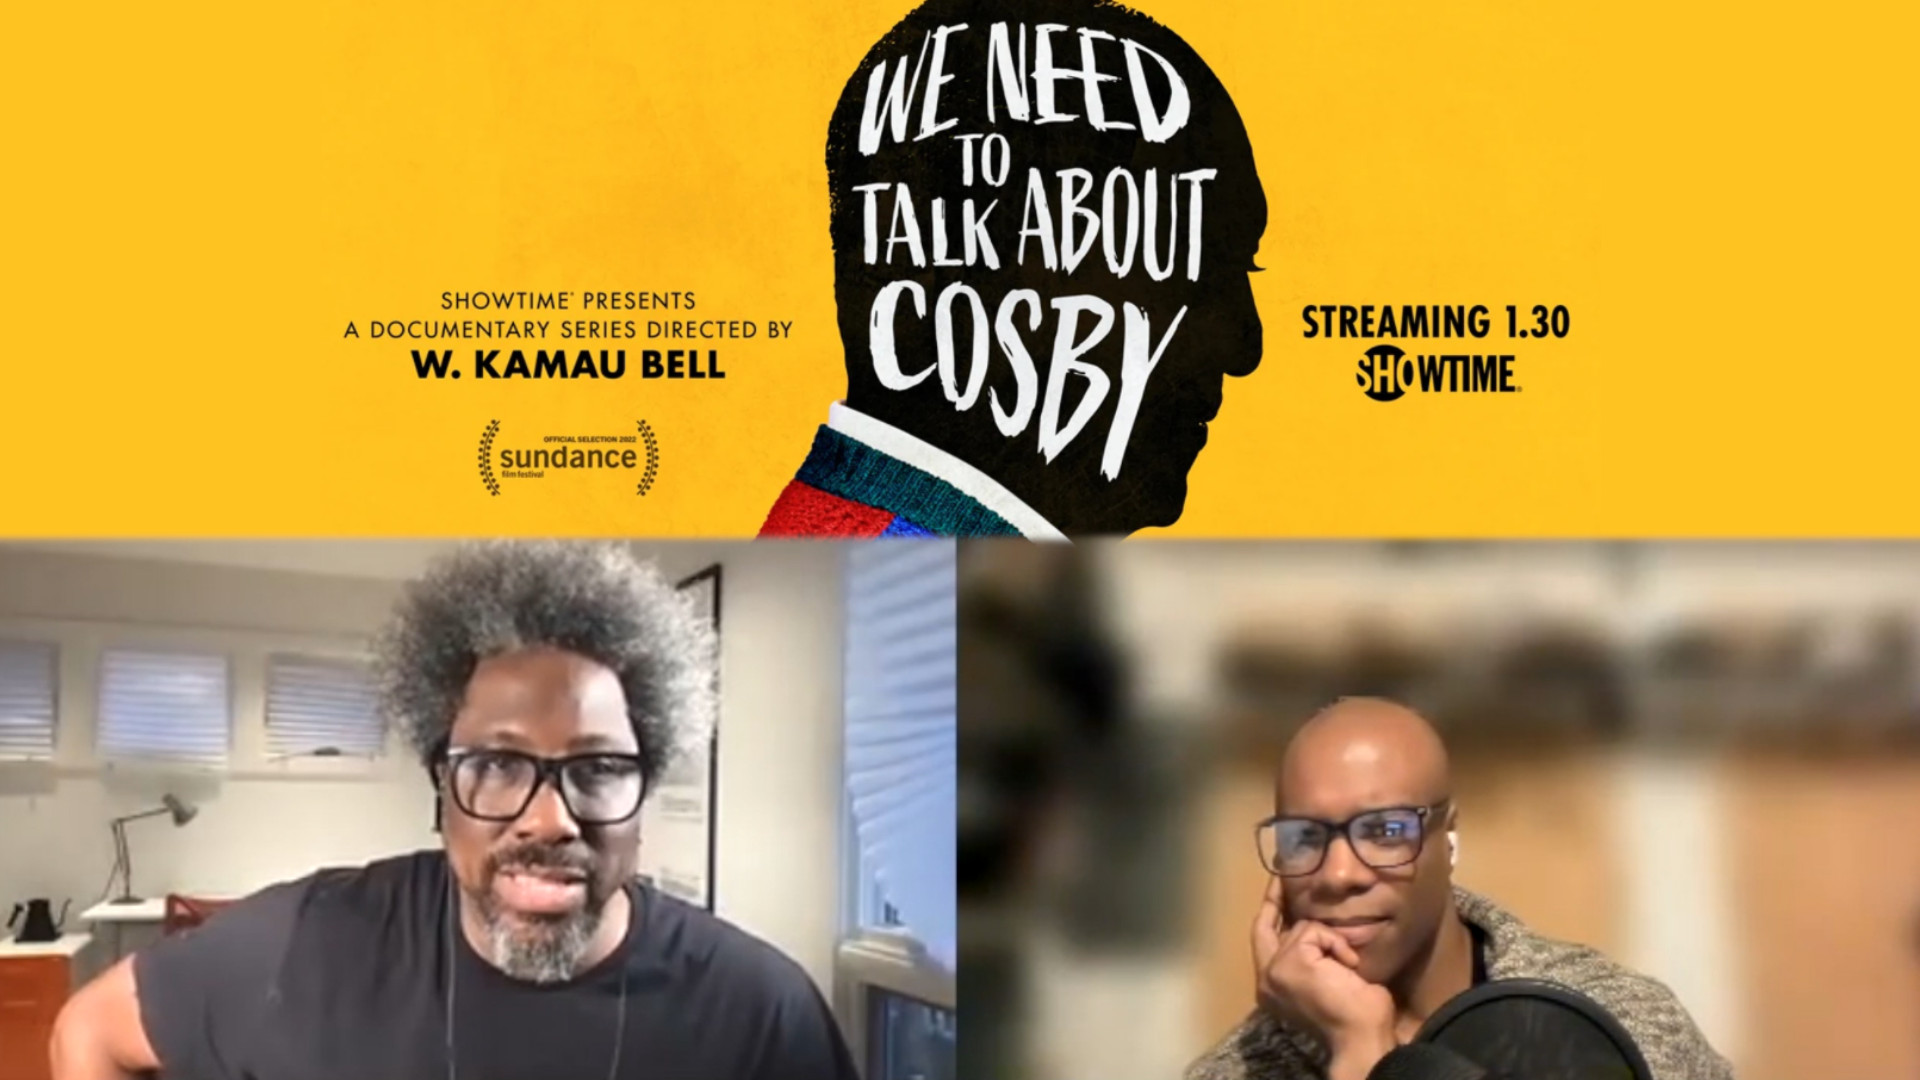 LRM Online Exclusive: W. Kamau Bell Interview | We Need To Talk About Cosby